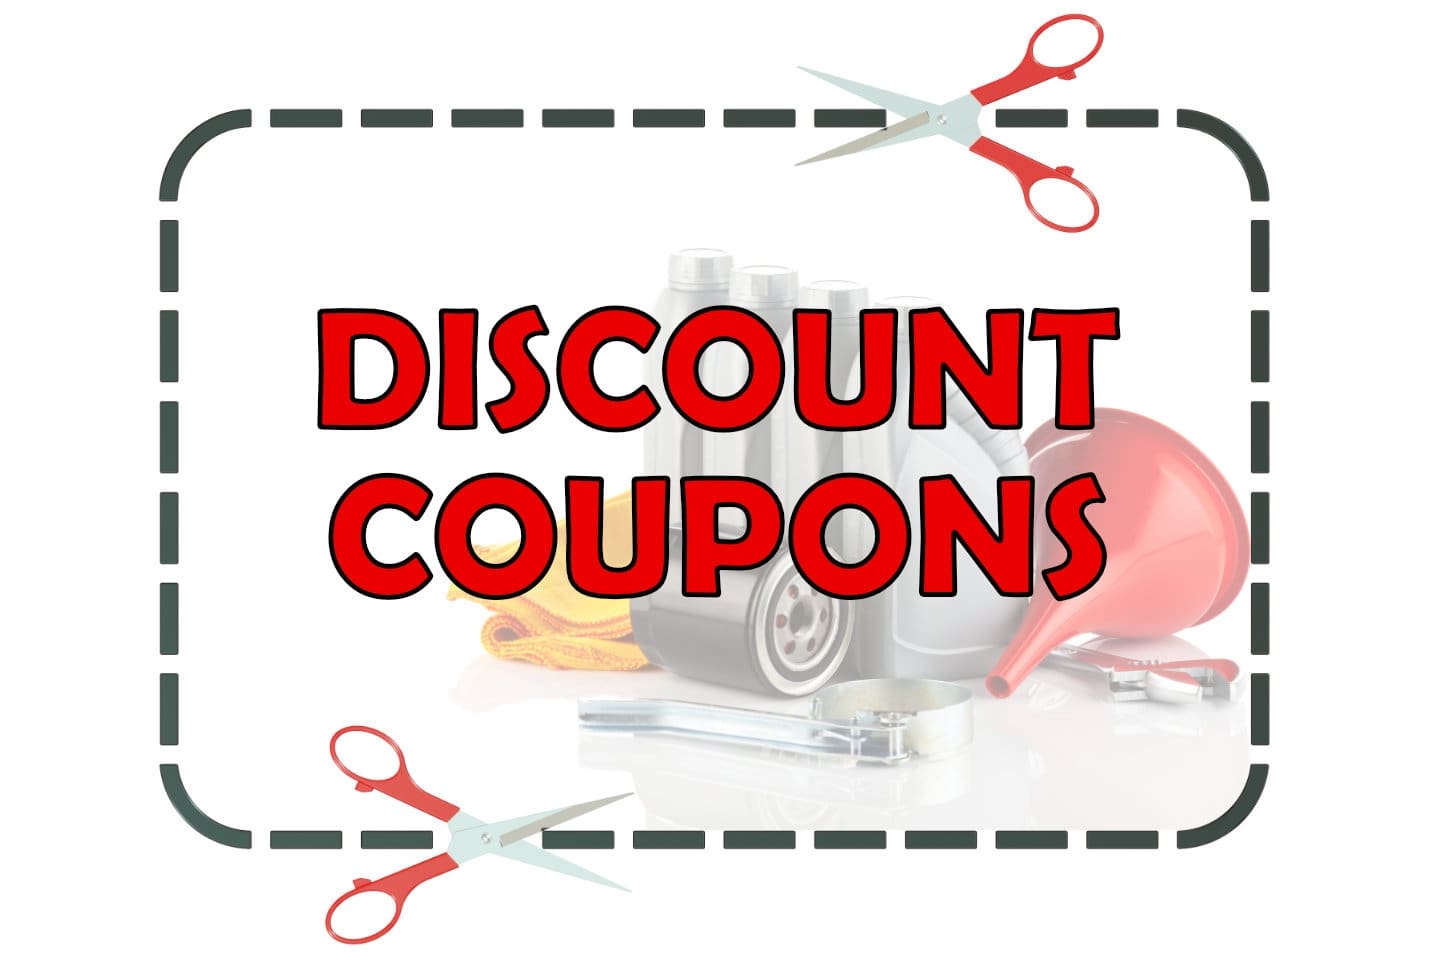 Discount coupons available 